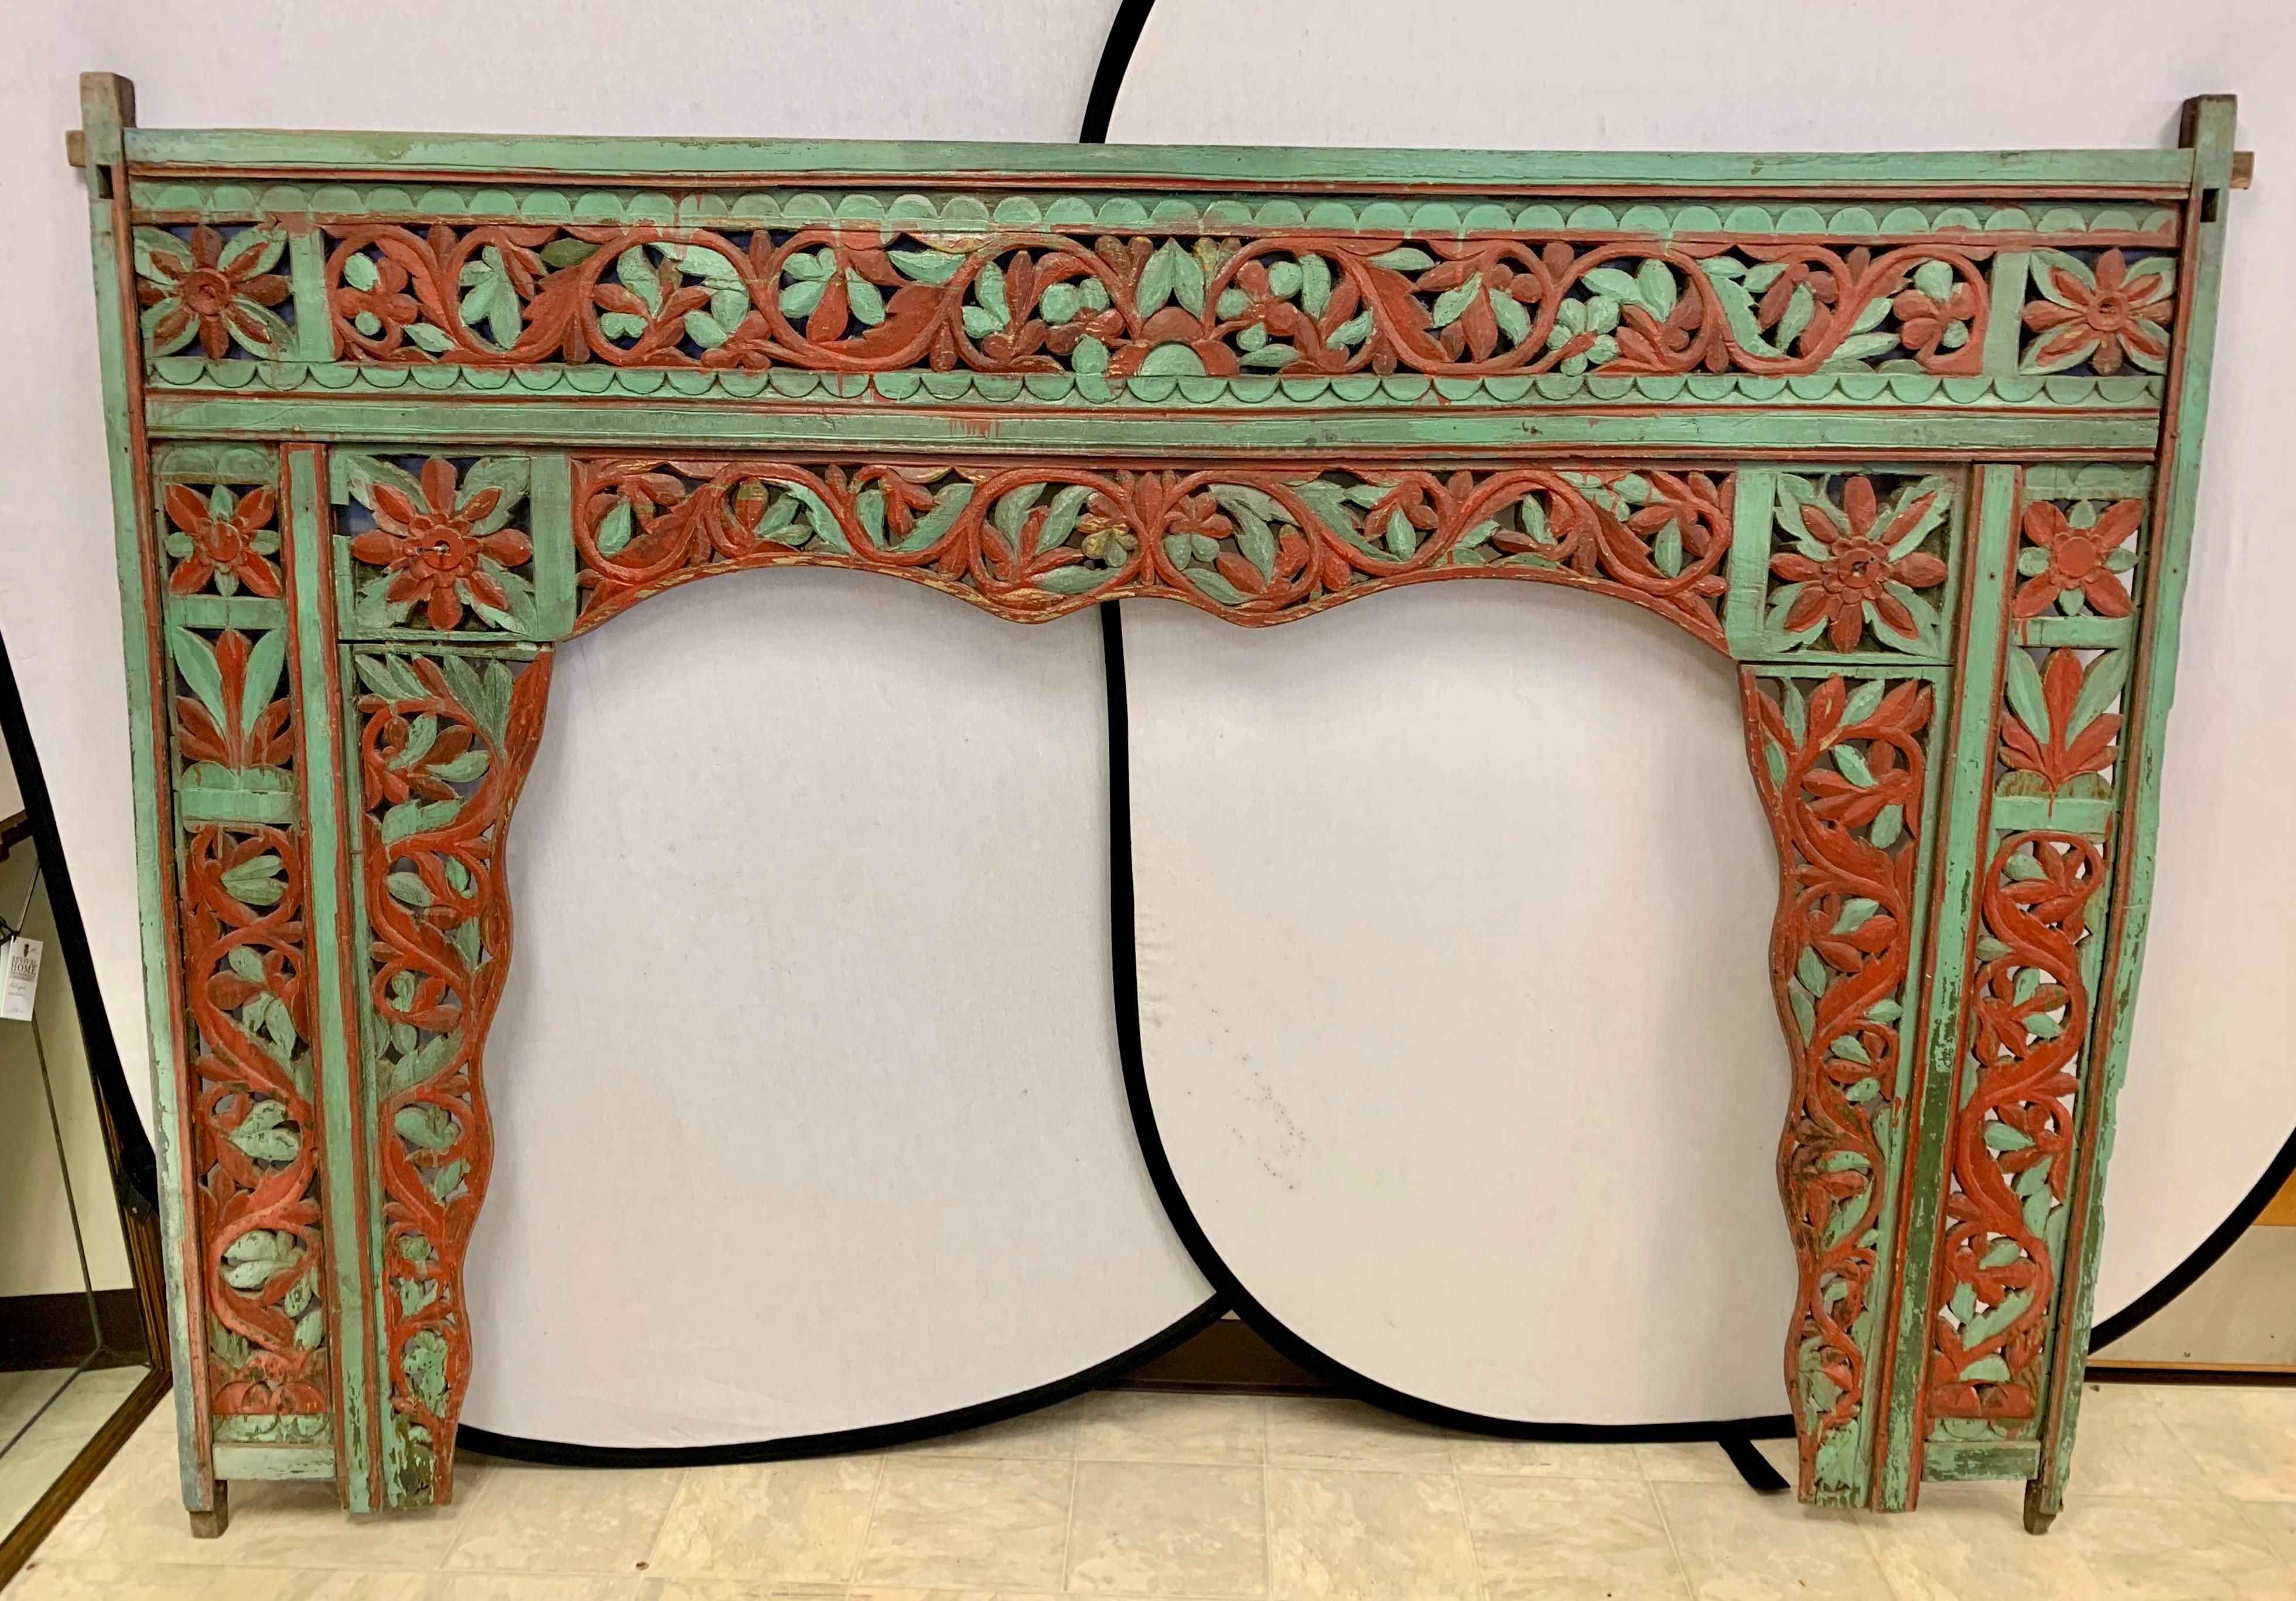 Magnificent vintage carved king headboard  from Bali, circa late 19th century that was acquired by our client via a Paris Flea market purchase back in the 1970s. The colors, green and red are quite vibrant but the intricate carved detail makes it a